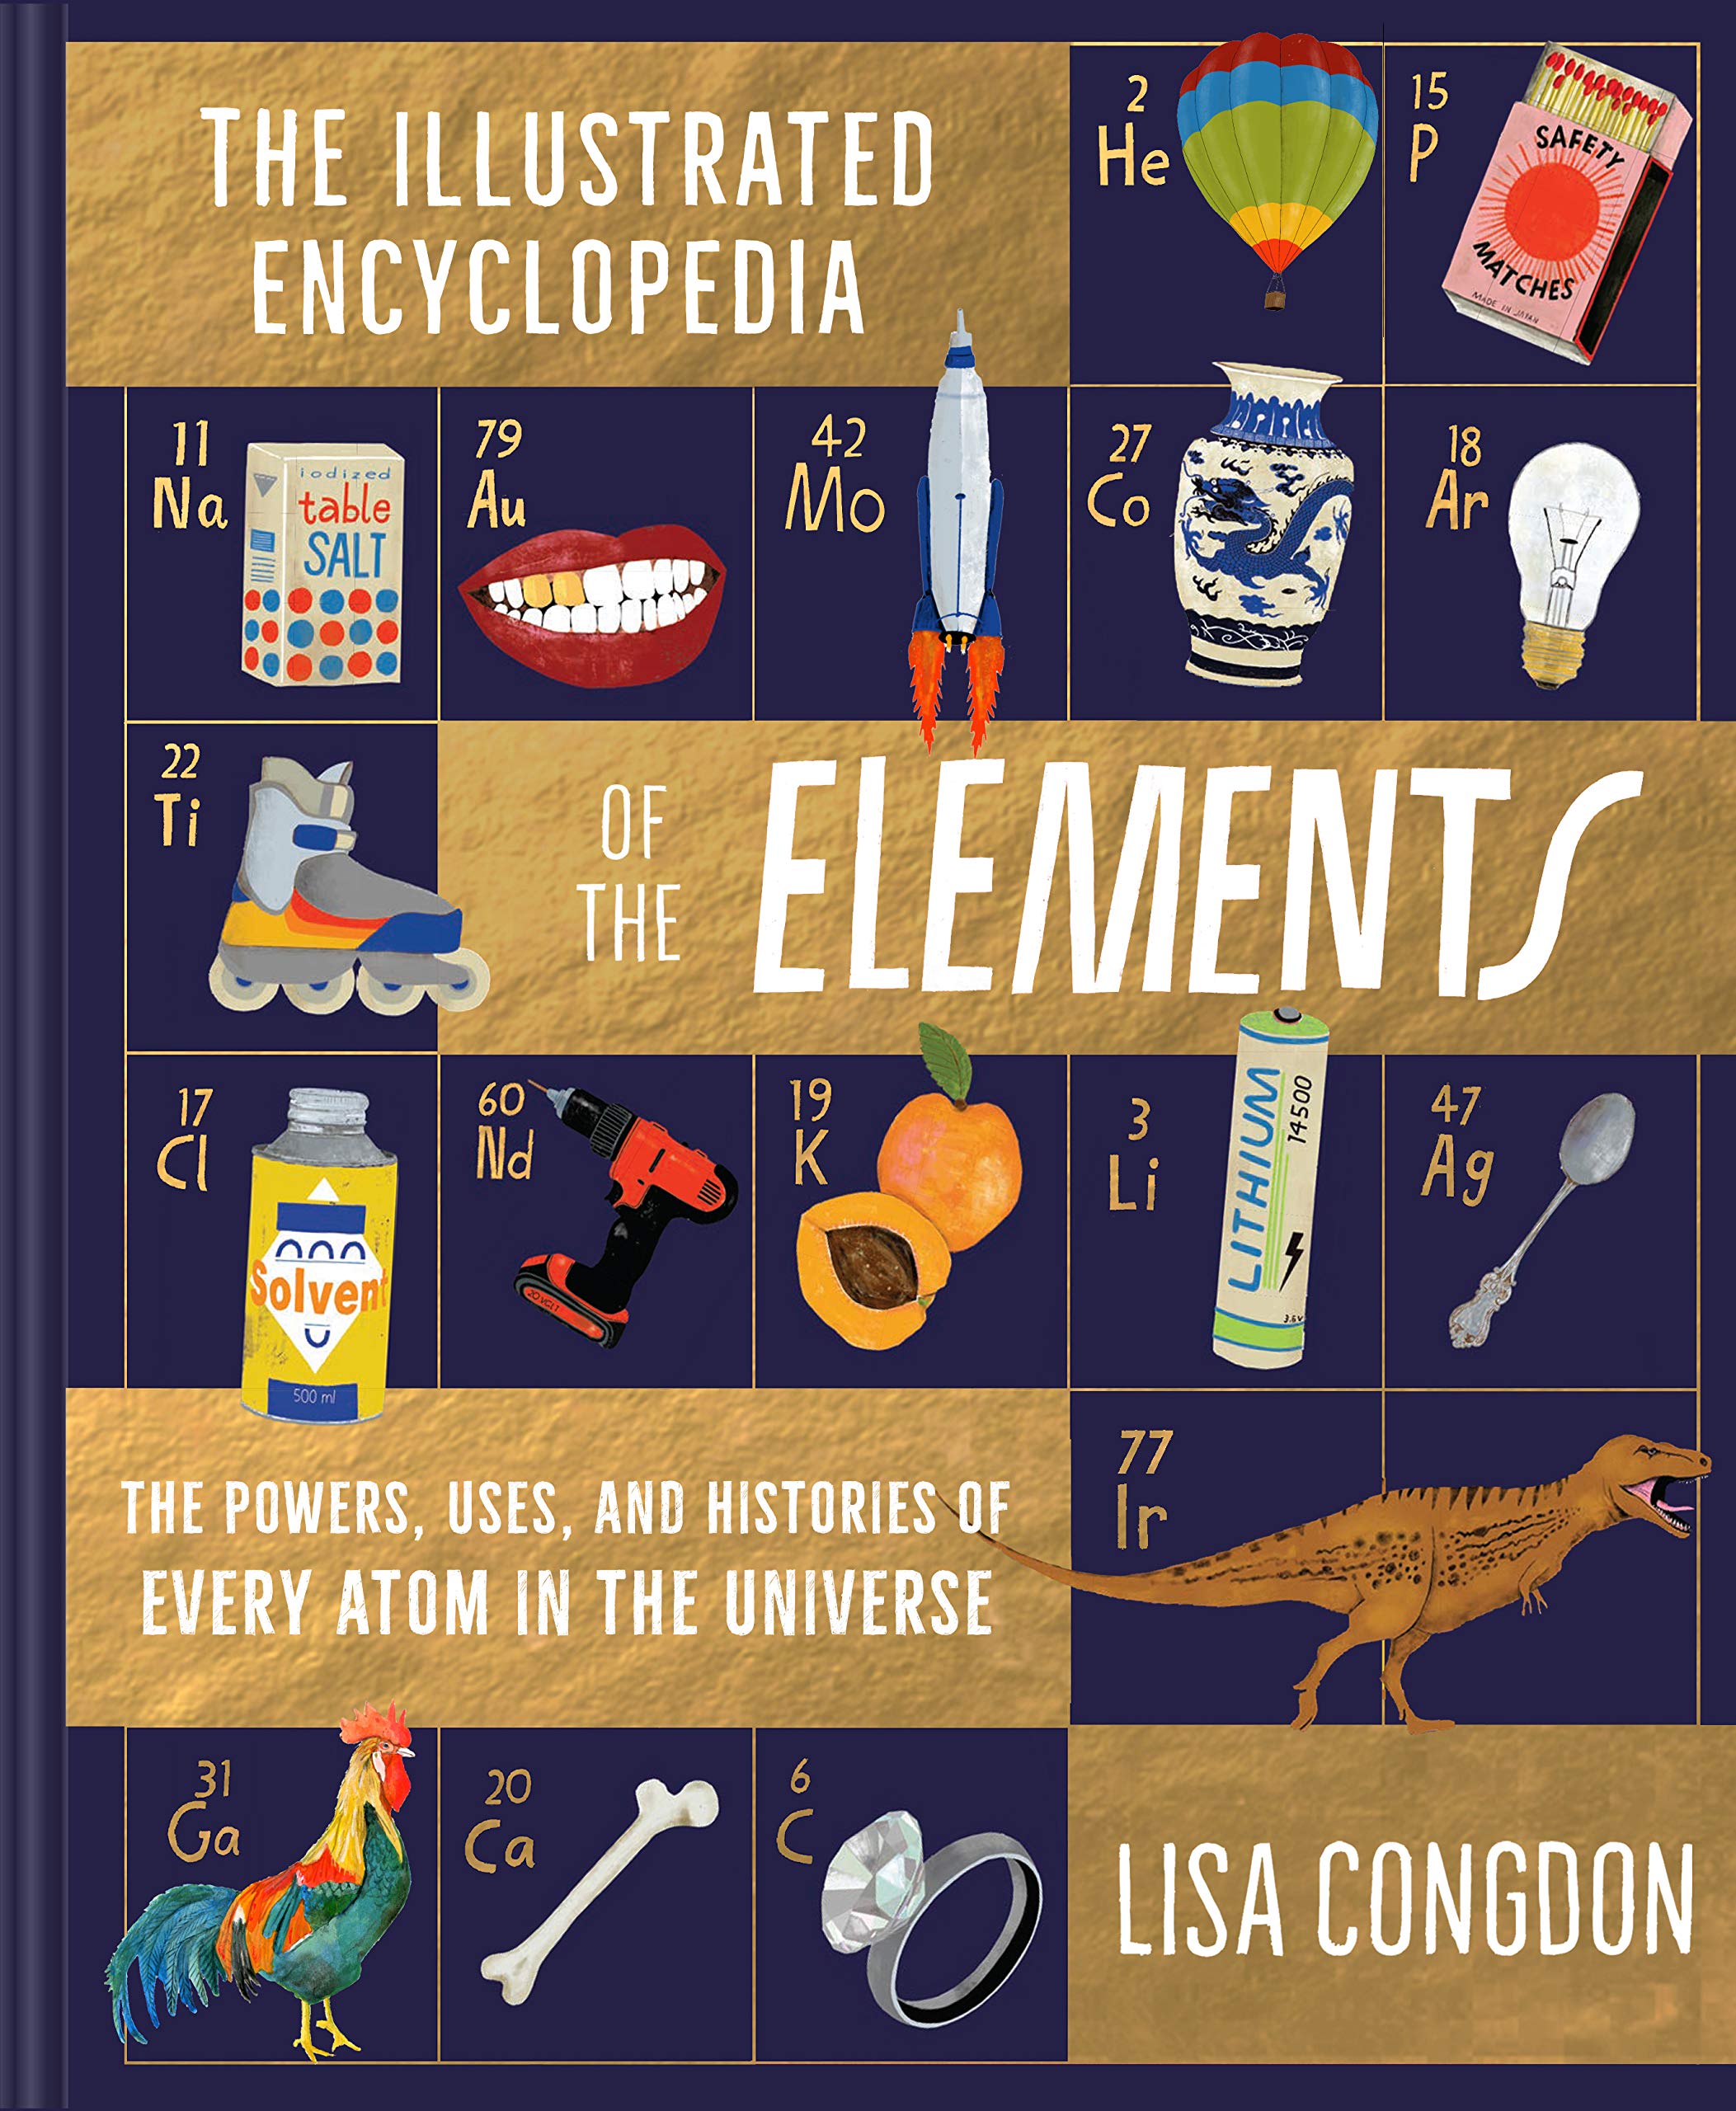 An indigo cover with a gold foil grid emulating the periodic table of the elements, with spot art including hot air balloons, roller skates, a rooster, and more.